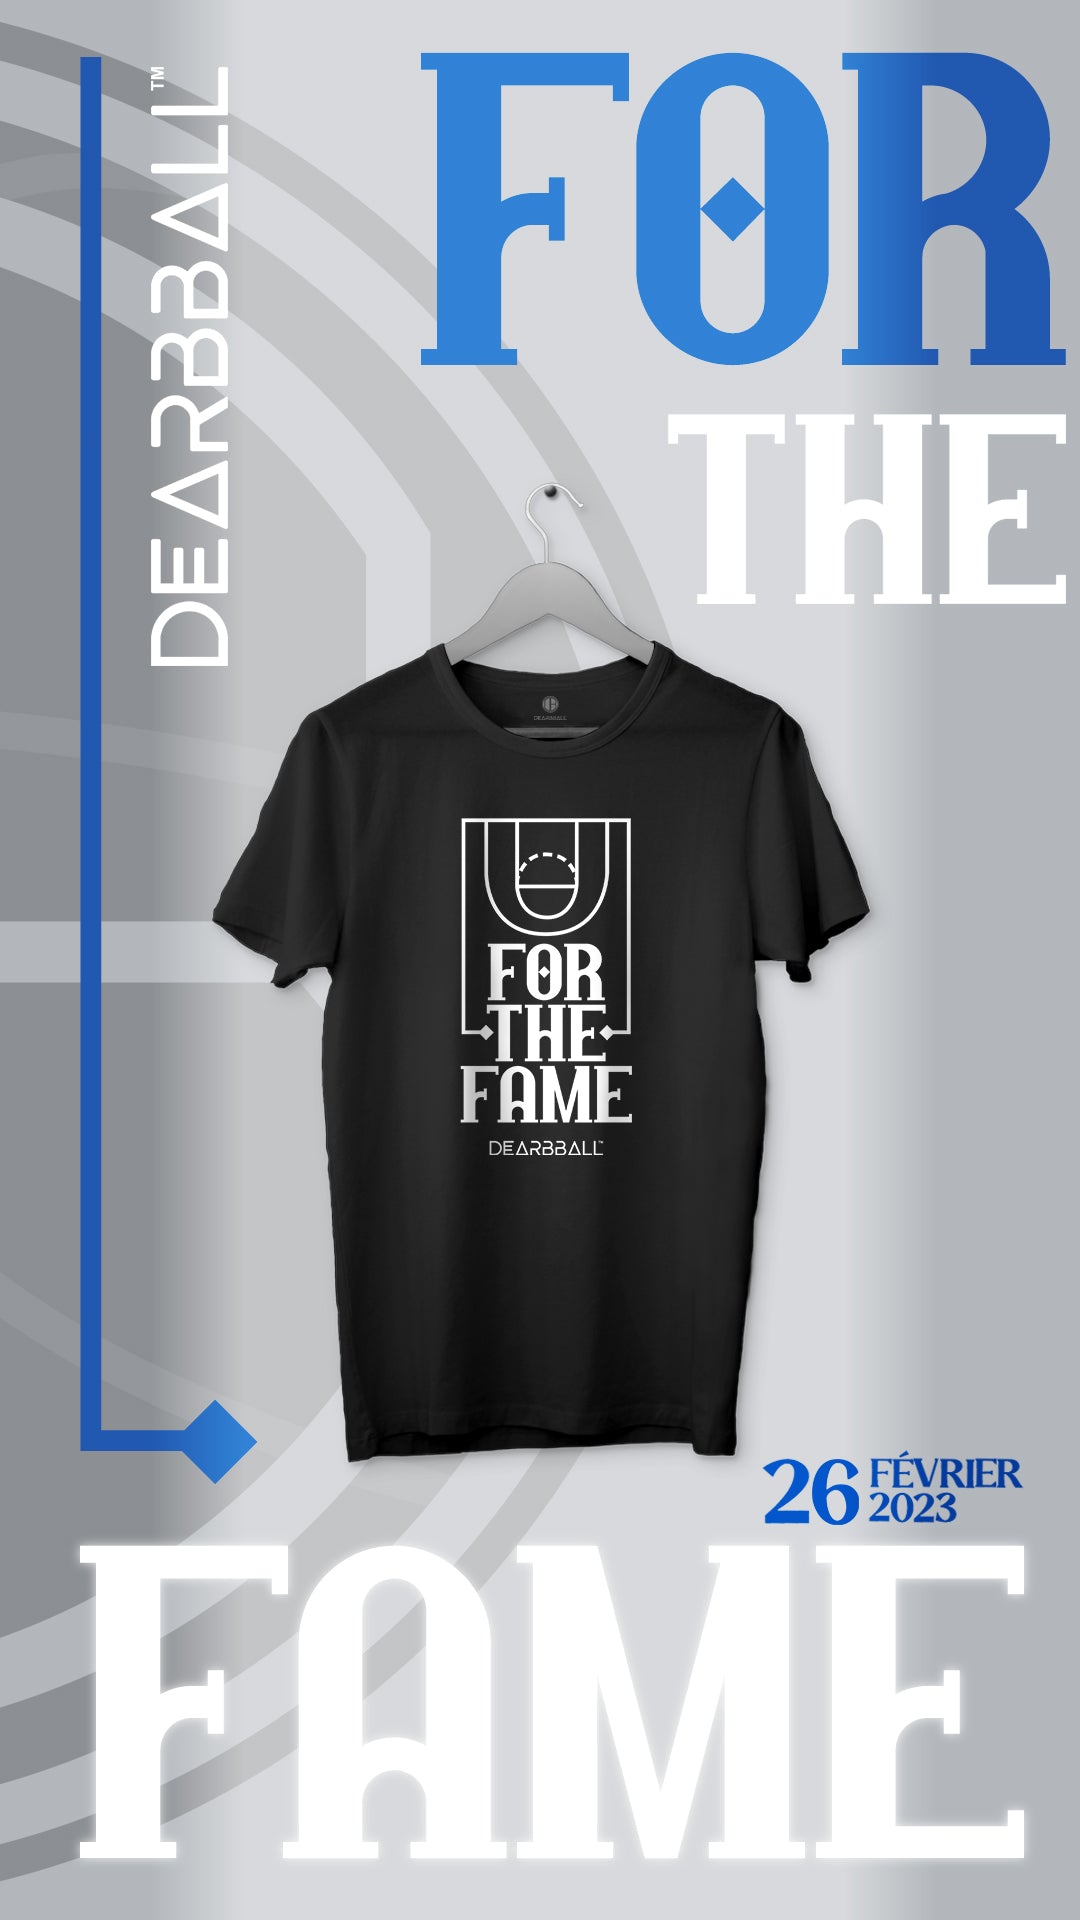 DearBBall T-Shirt - For The Fame Edition Limitée